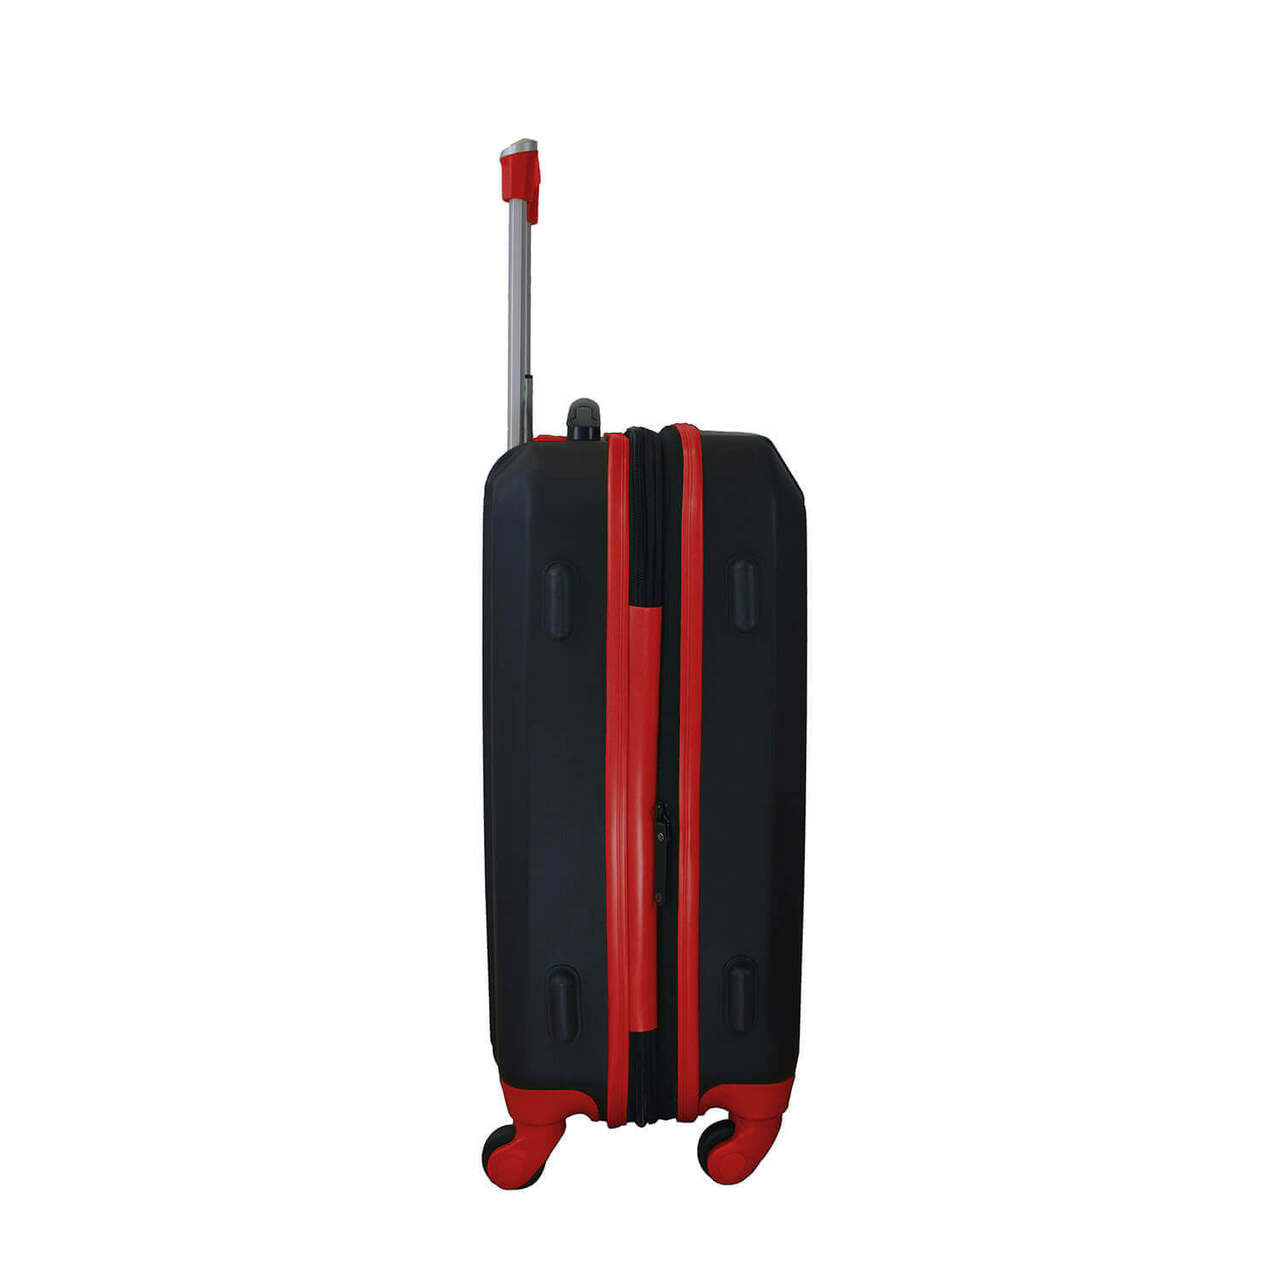 Nationals Carry On Spinner Luggage | Washington Nationals Hardcase Two-Tone Luggage Carry-on Spinner in Red